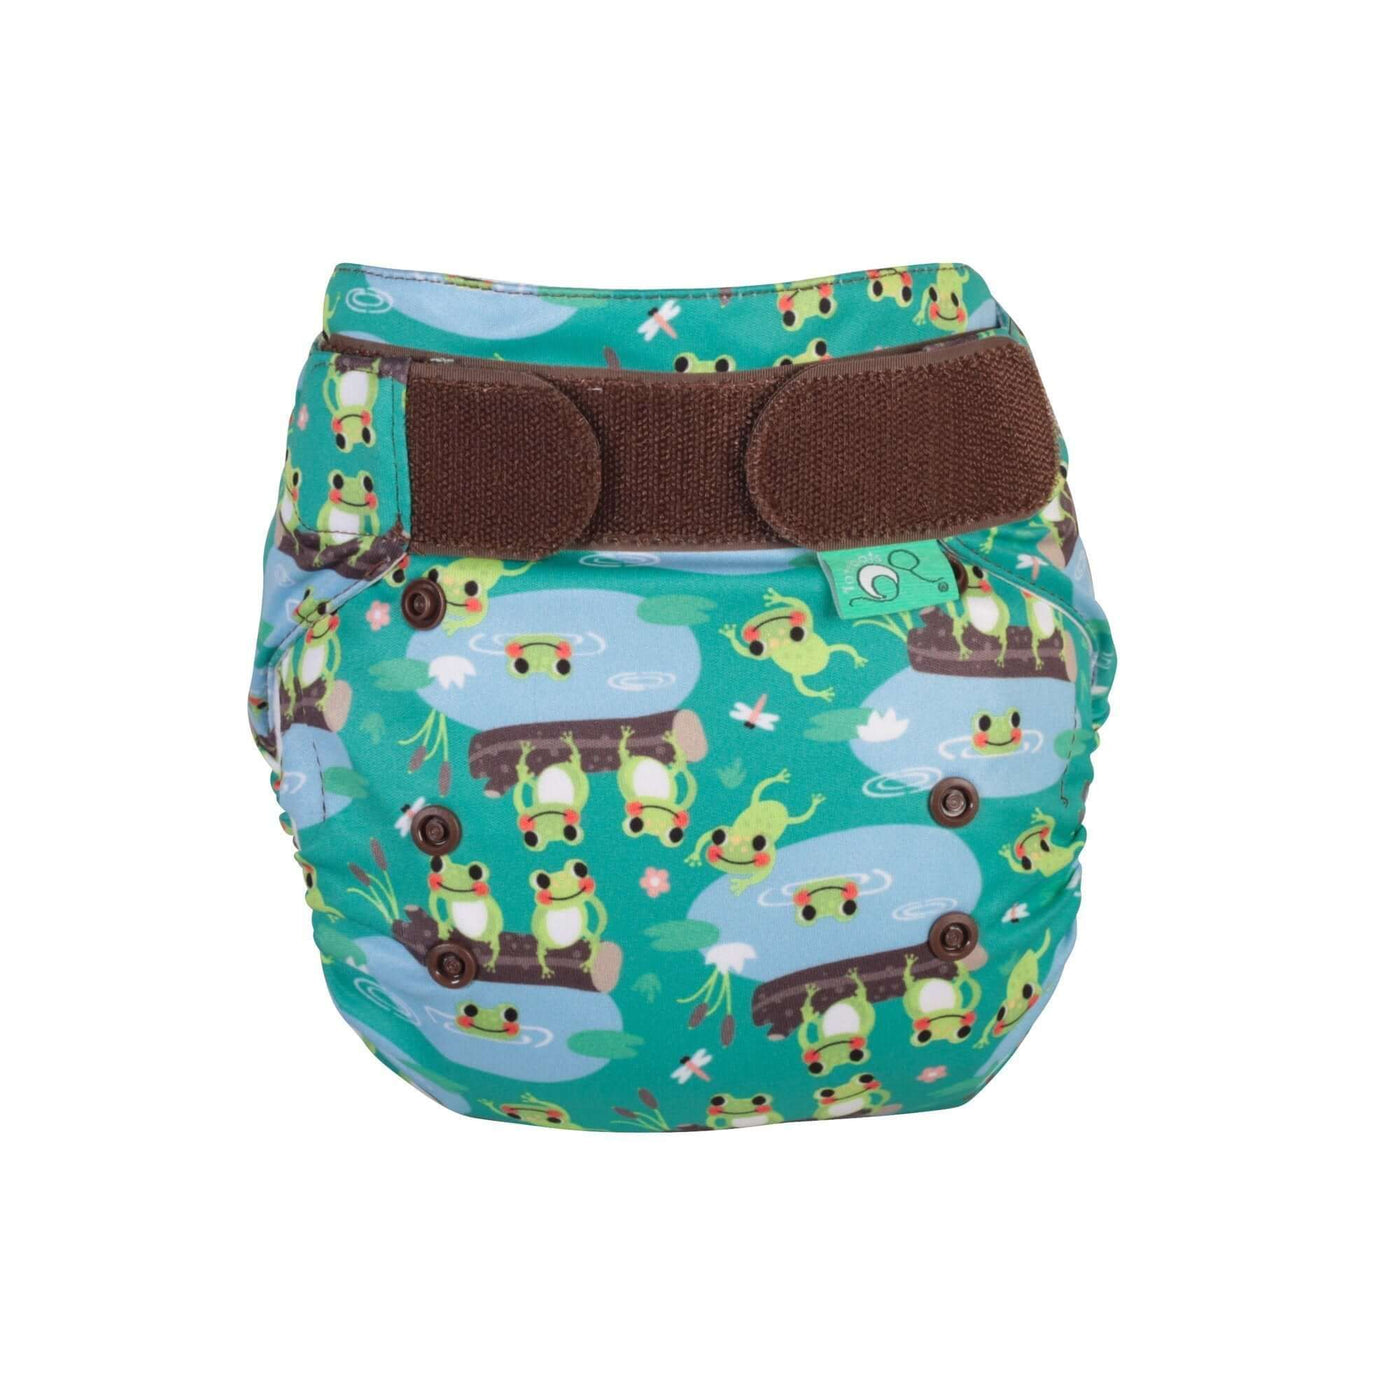 Tots Bots EasyFit Star Nappy All-in-one Colour: Five Little Speckled Frogs reusable nappies Earthlets